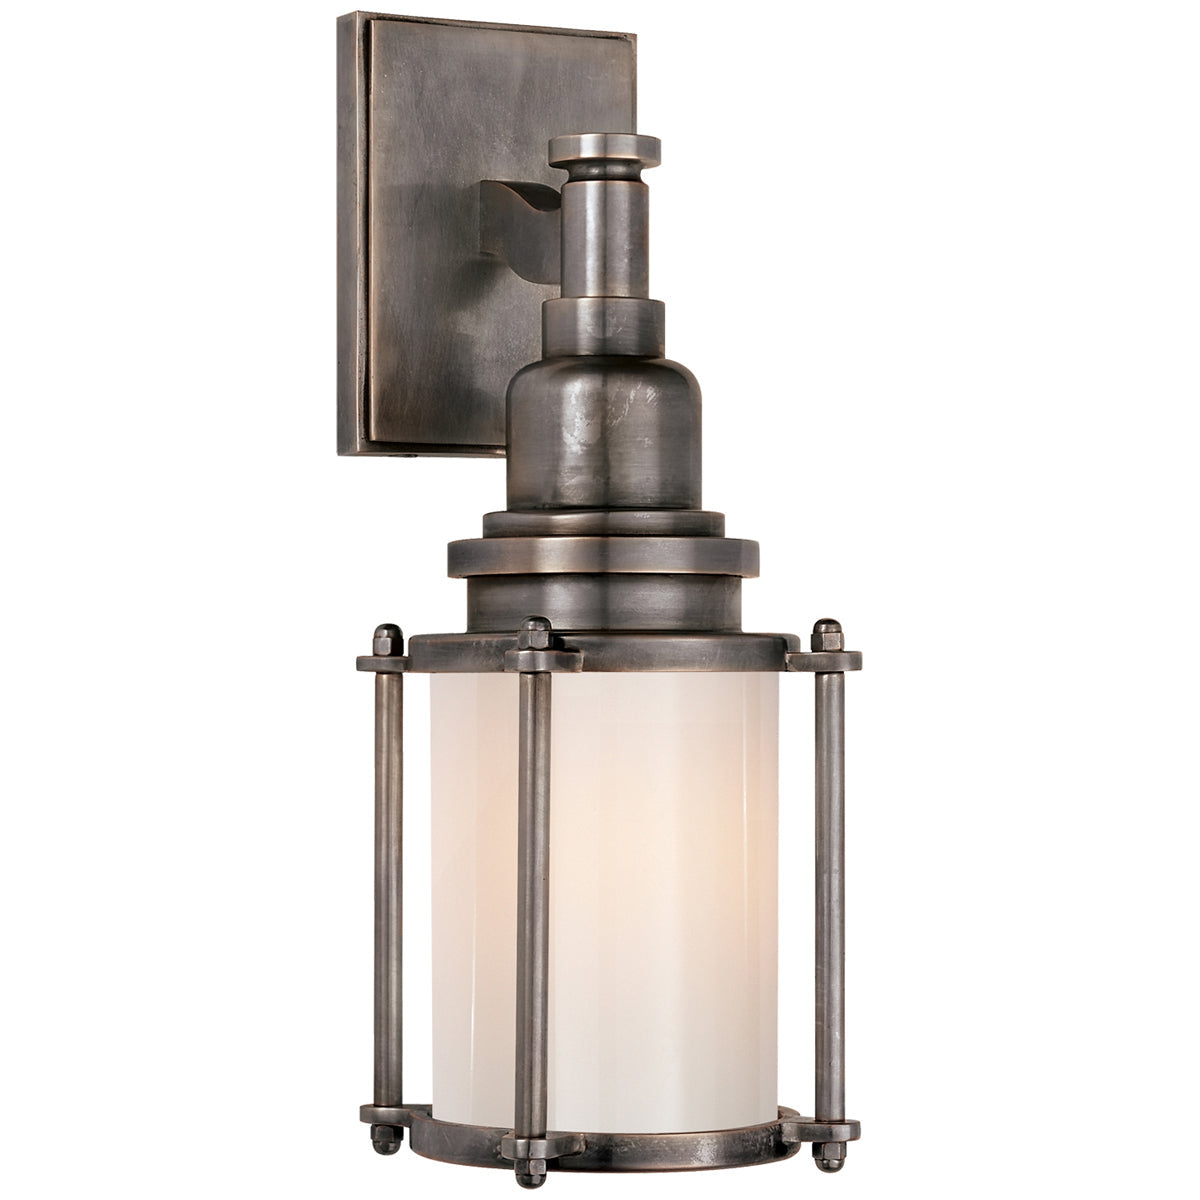 Visual Comfort Stanway Sconce with Clear Glass